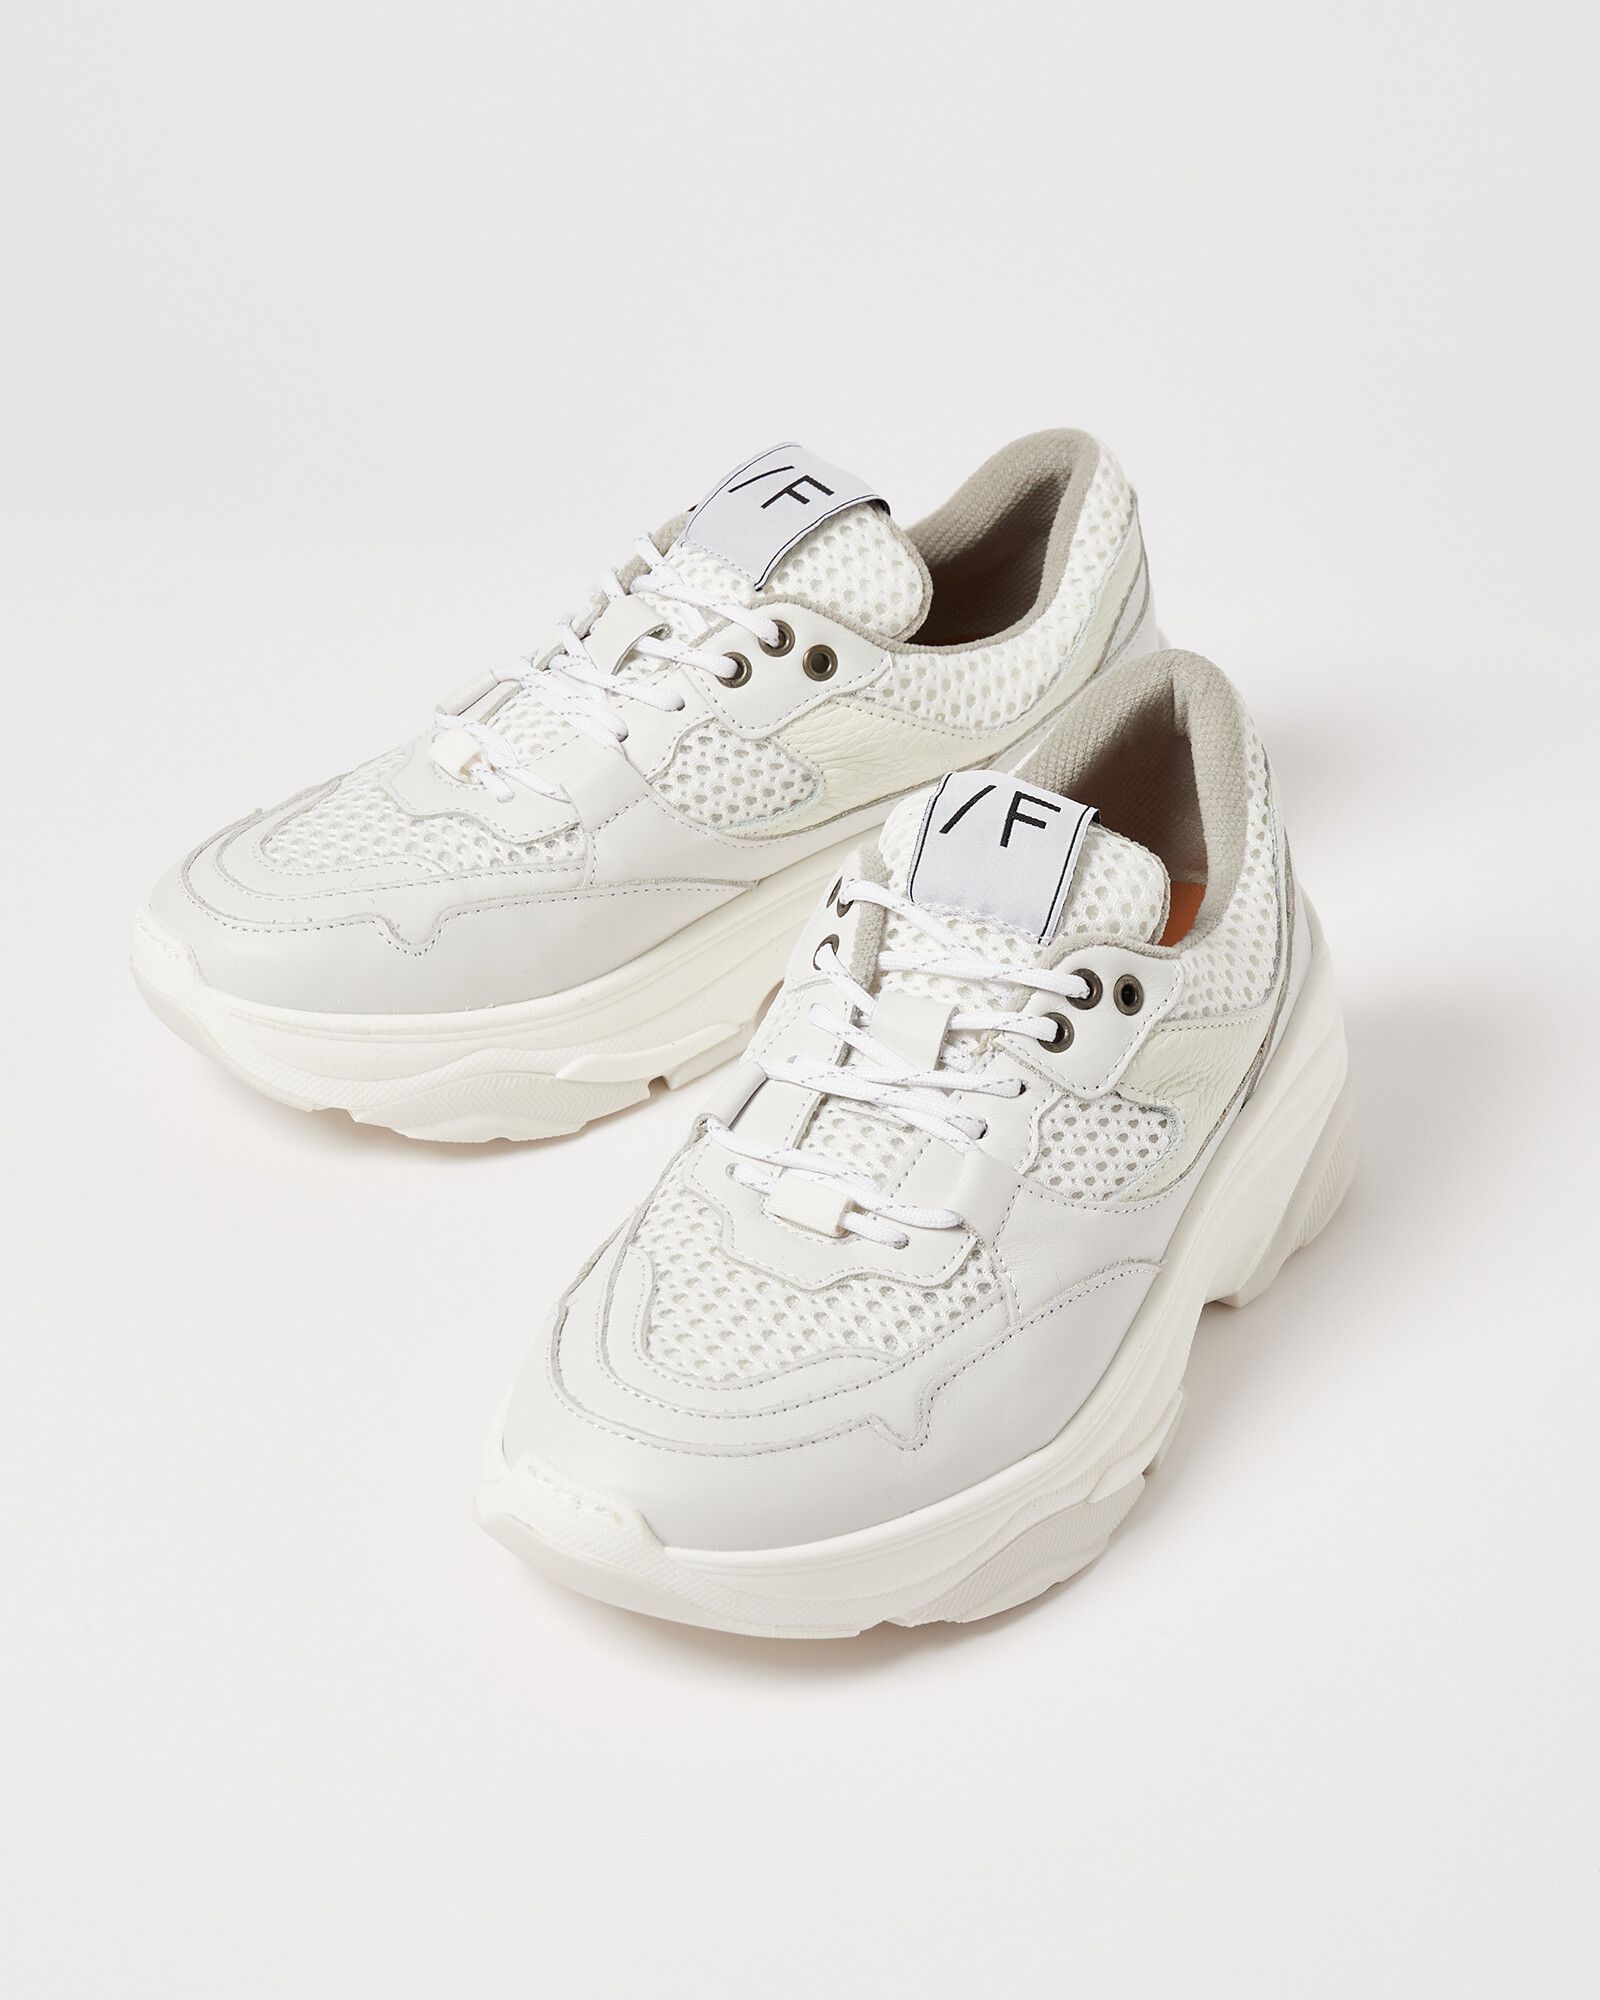 Selected Femme Chunky White Trainers | Oliver Bonas